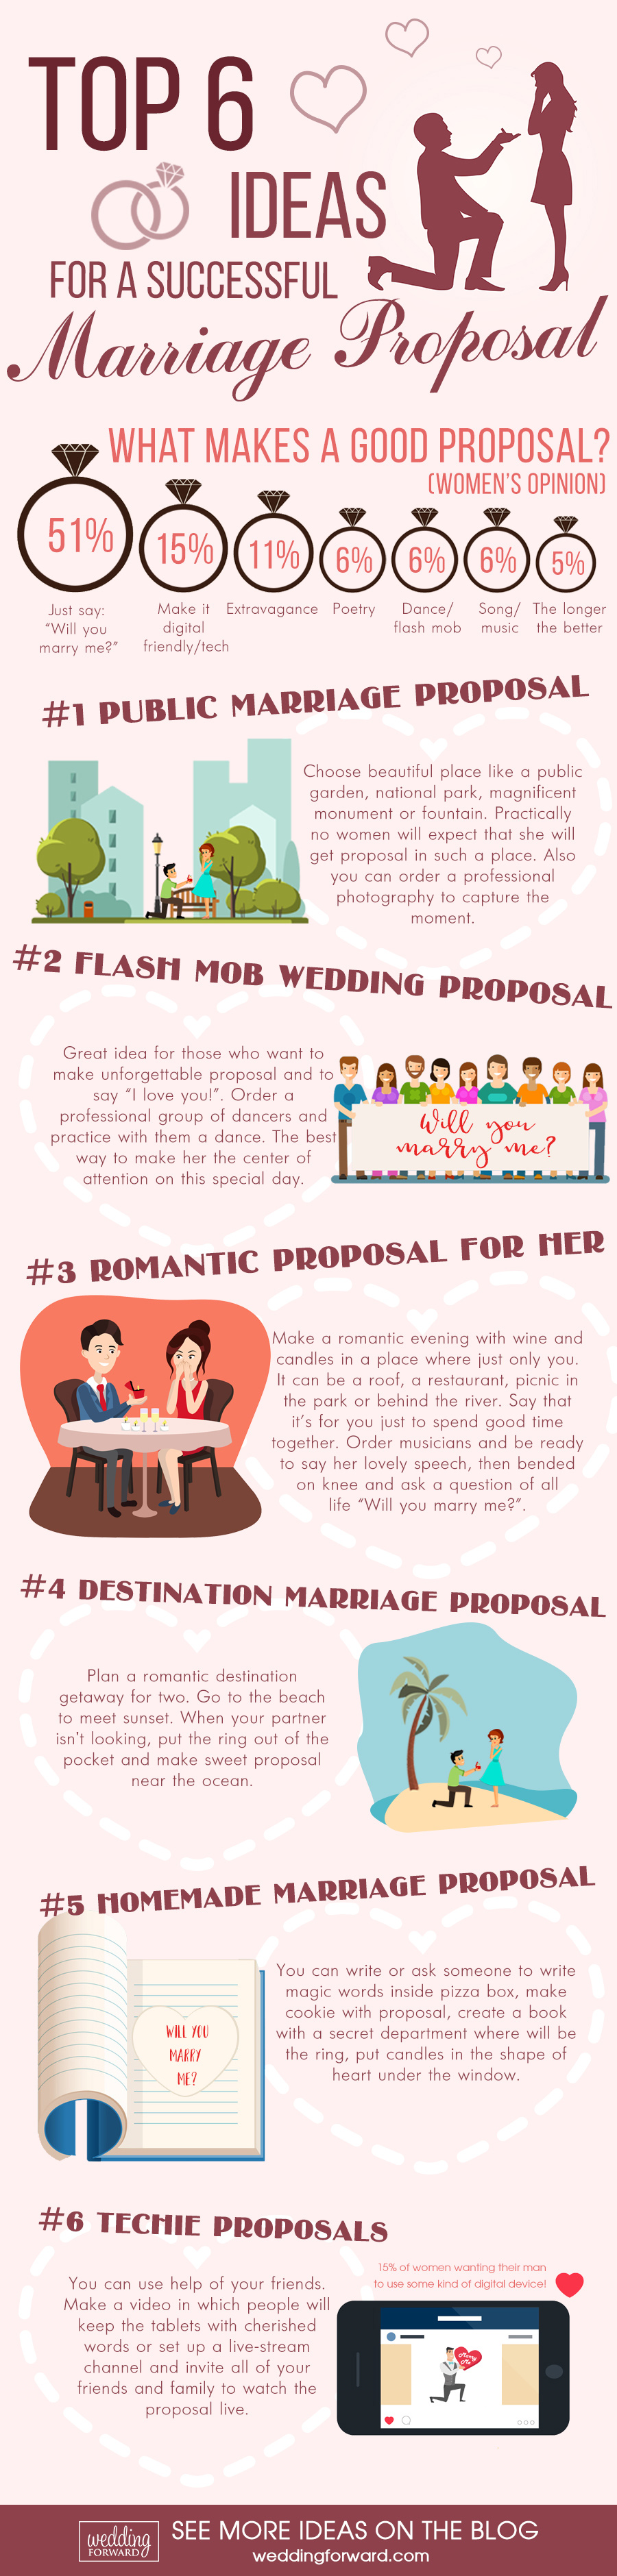  marriage proposal infographics top 6 ideas for a successful marriage proposal